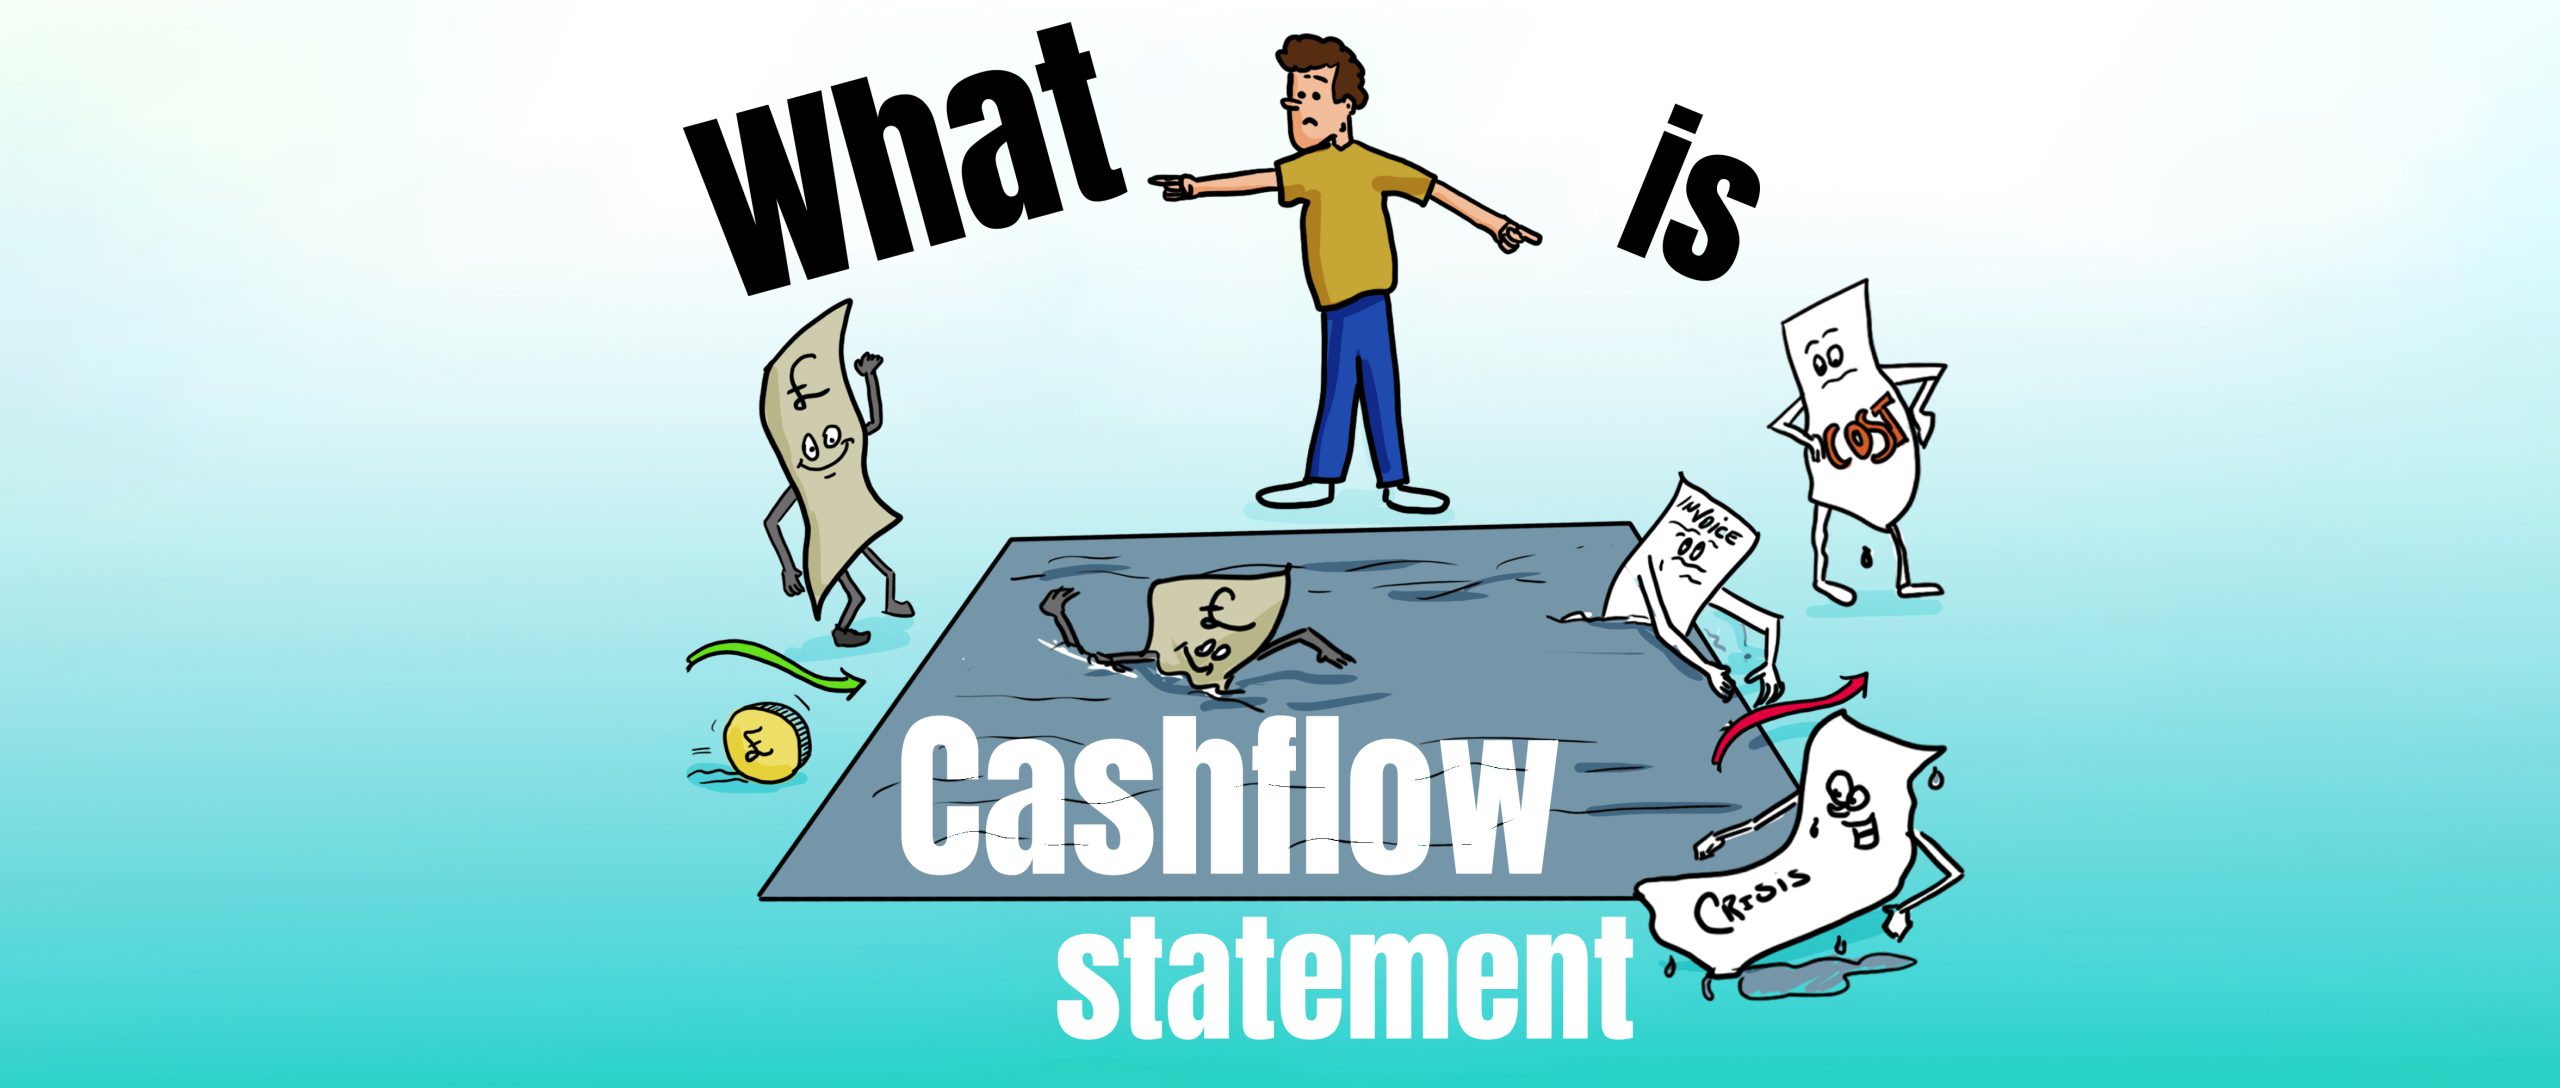 Looking at what a cashflow statement should show